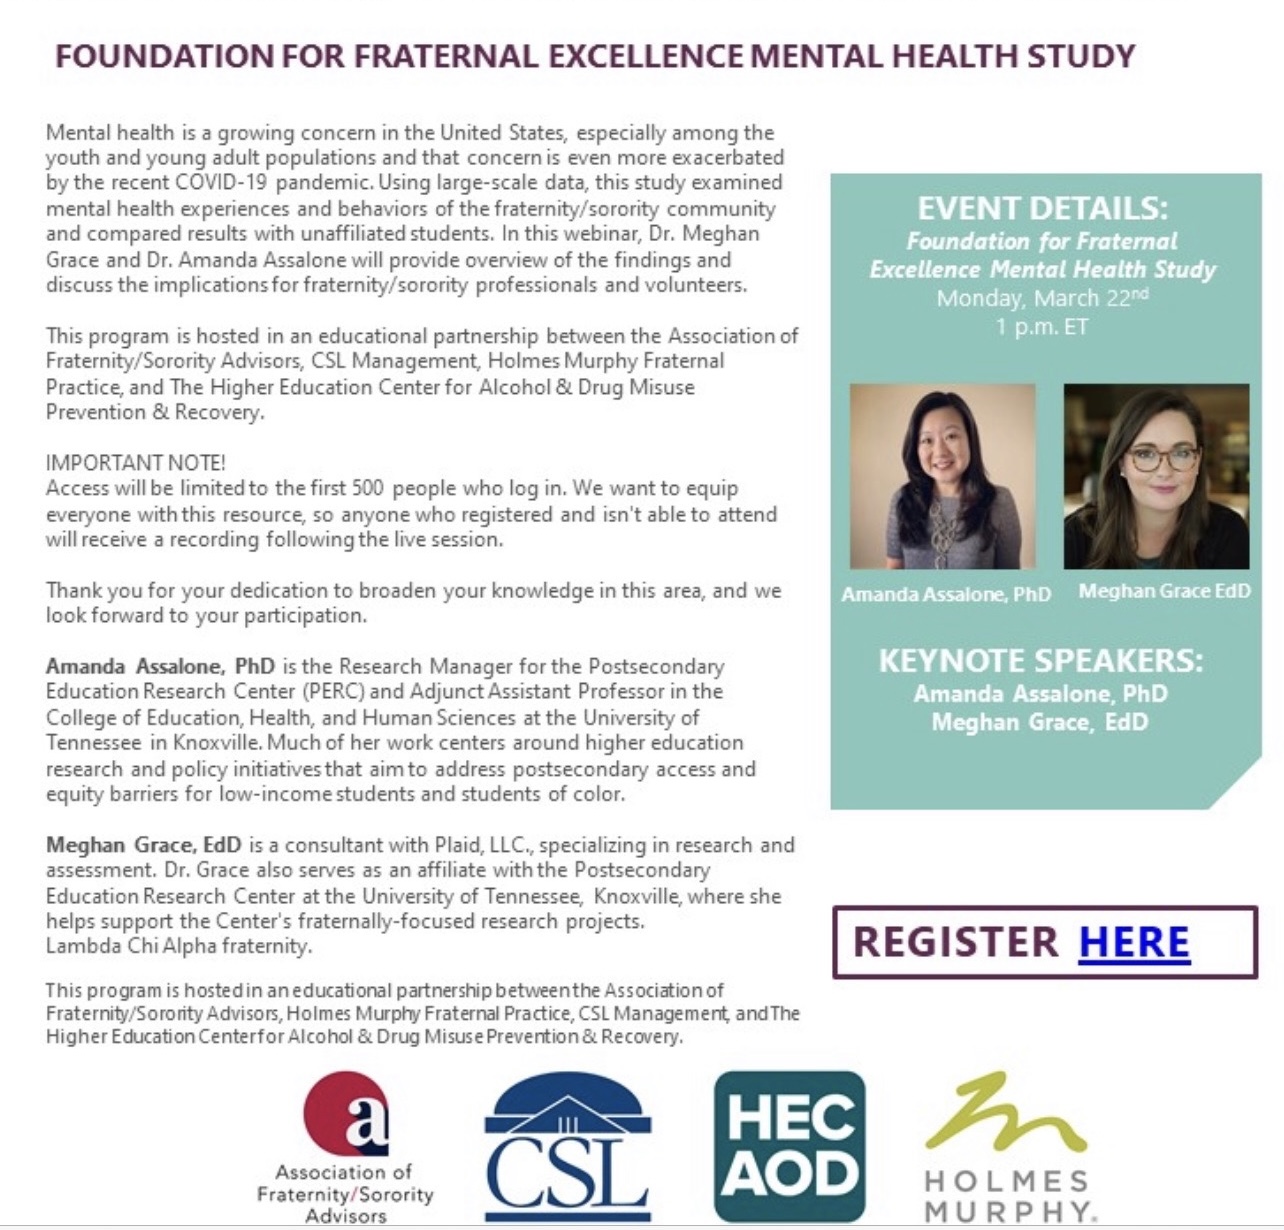 Foundation for Fraternal Excellence Mental Health Study